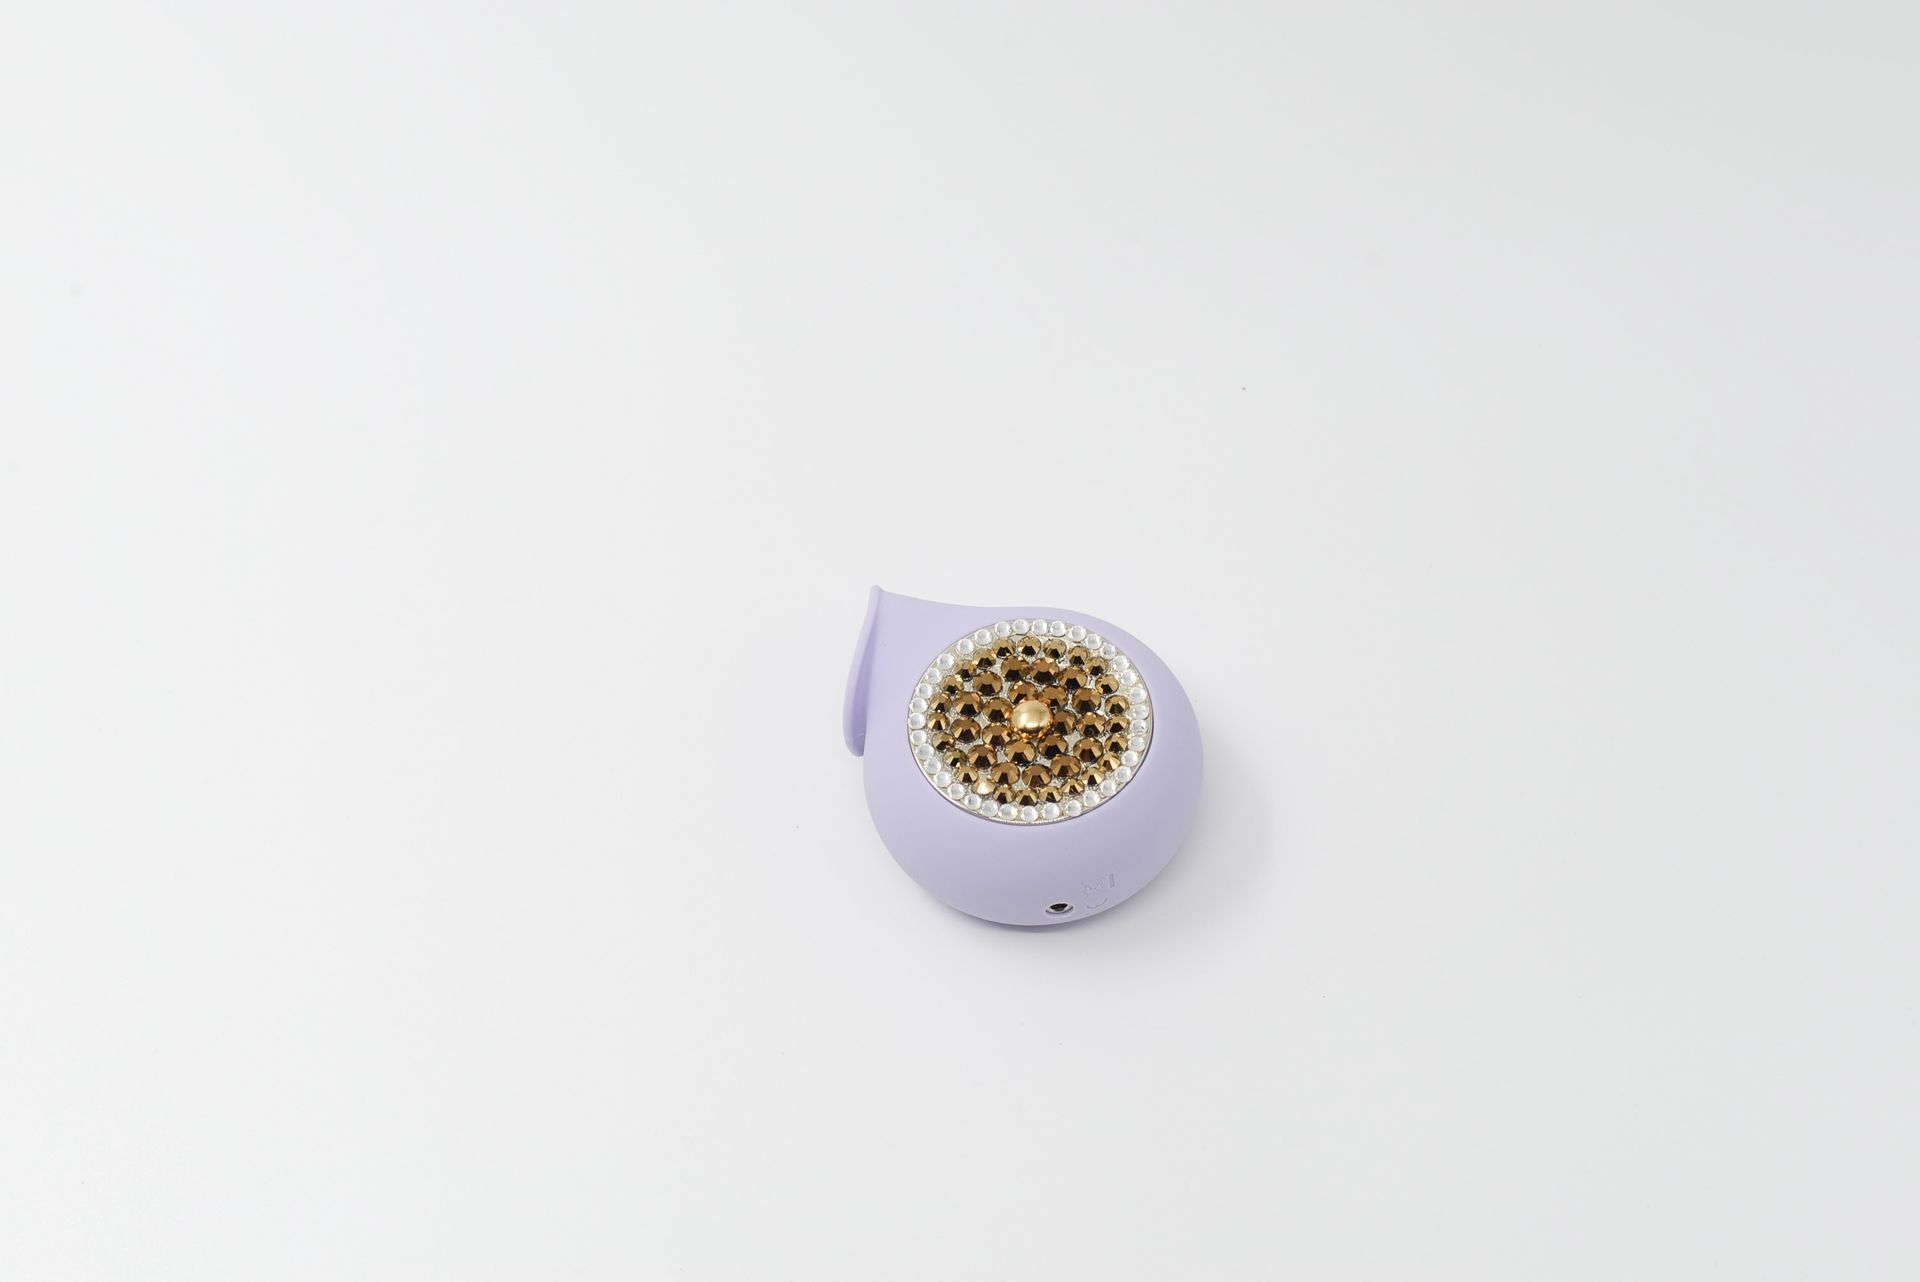 LELO x On Aura Tout Vu Paris Limited Edition 
LELO SILA Lilac, revisited by On A&hellip;